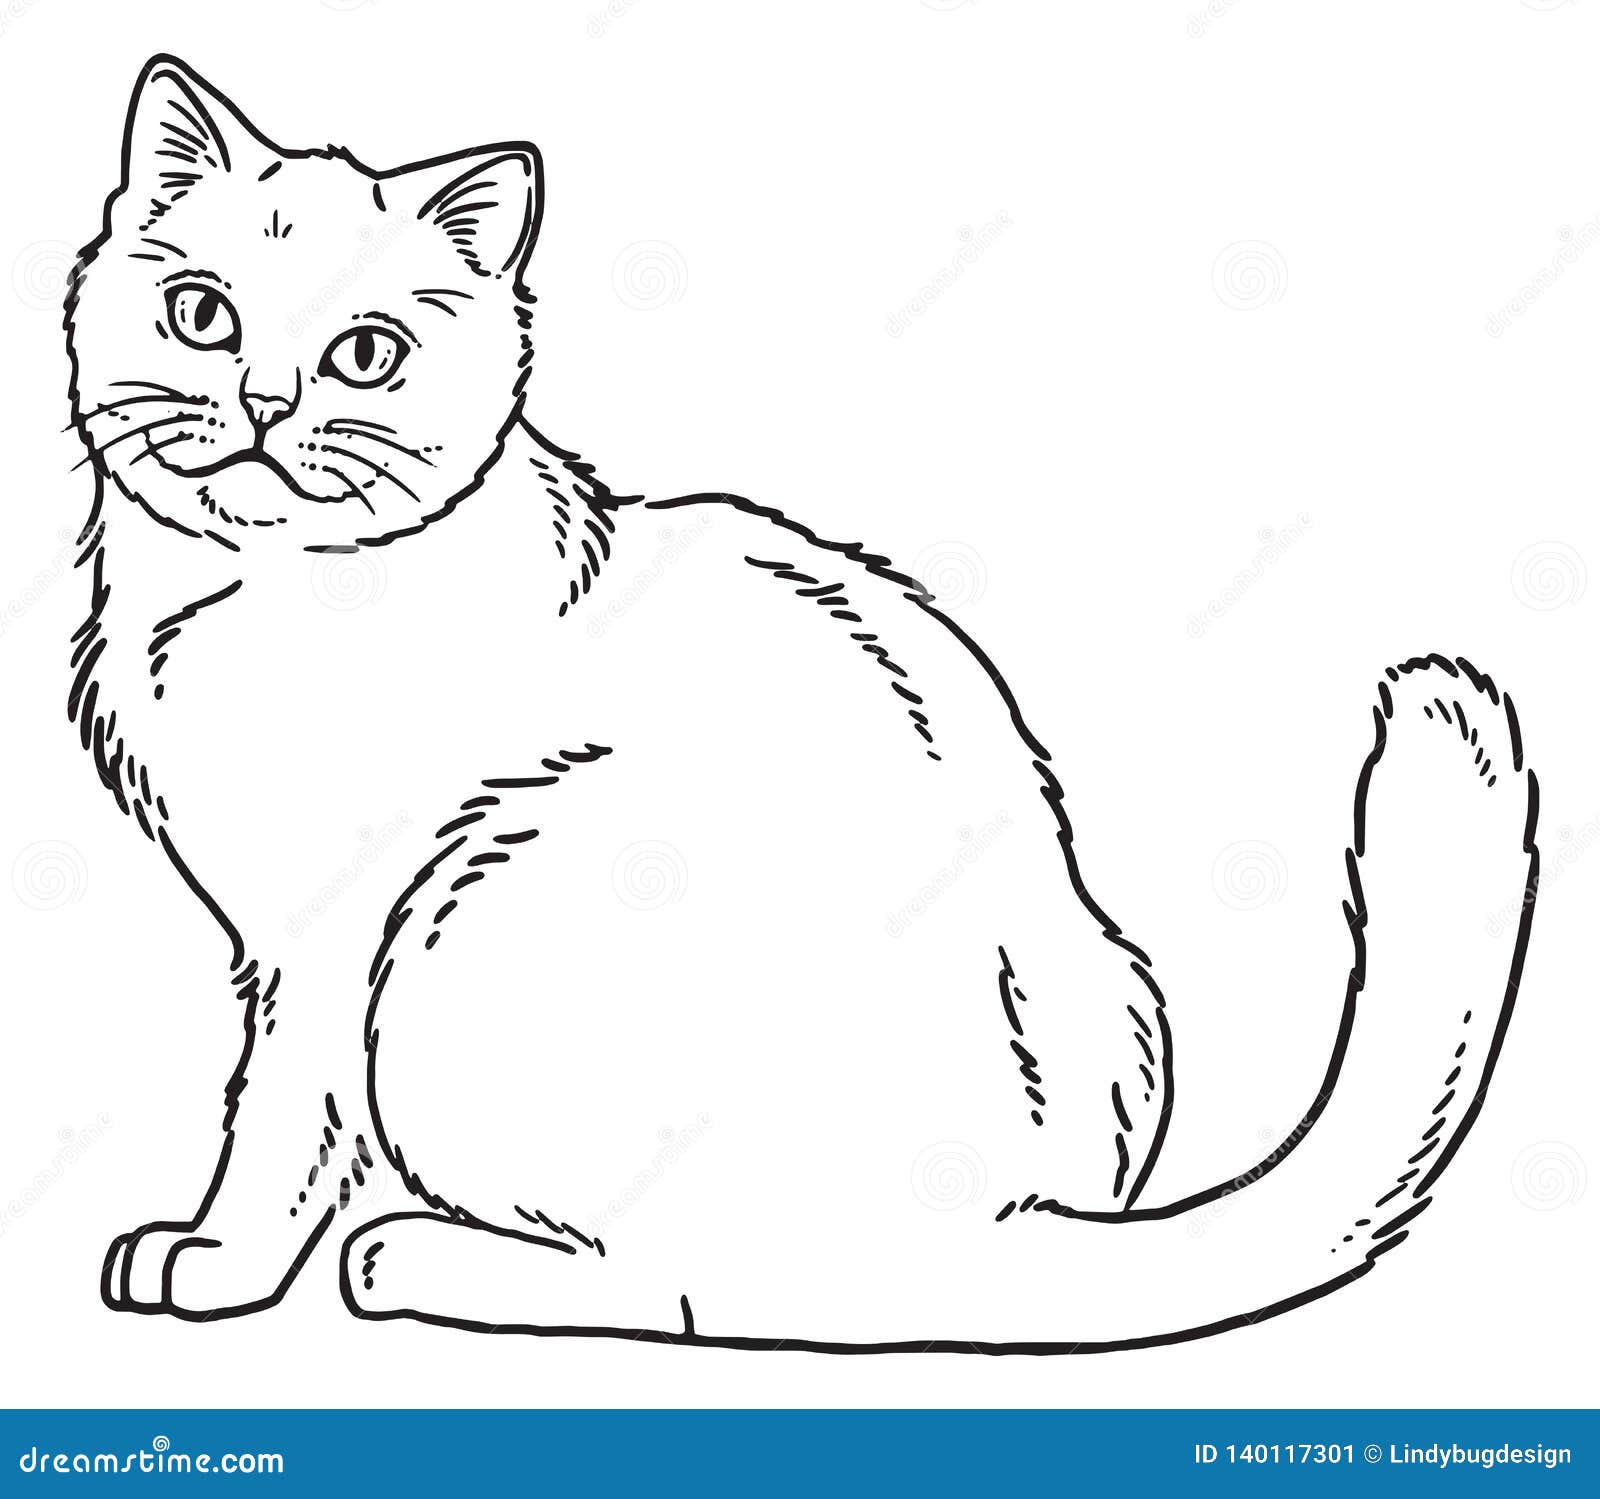 Share more than 83 cat outline sketch - in.eteachers